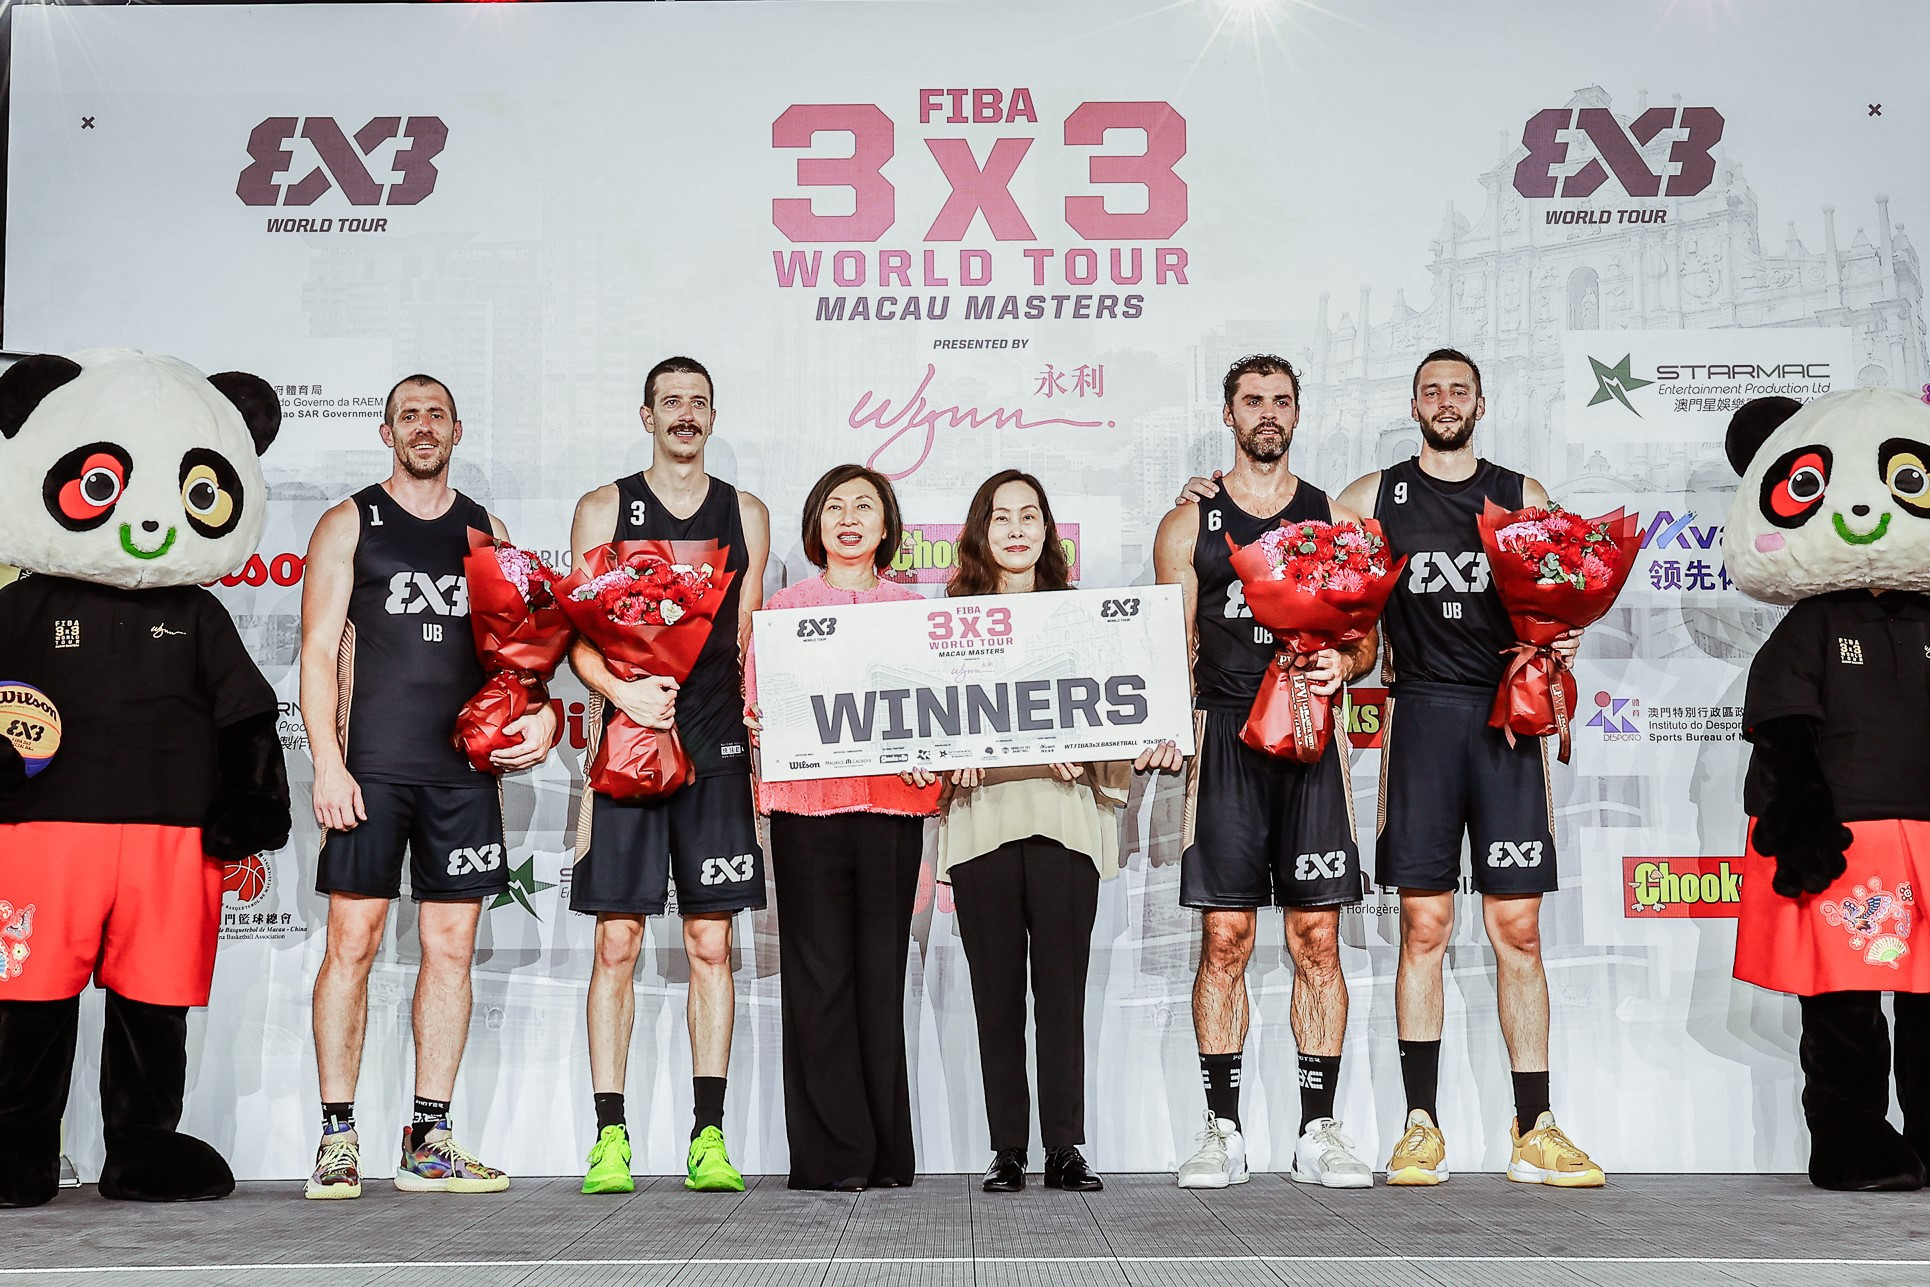 Defending champions Ub from Serbia won their fourth consecutive FIBA 3x3 World Tour event at the start of the 2023 season ©fiba.basketball